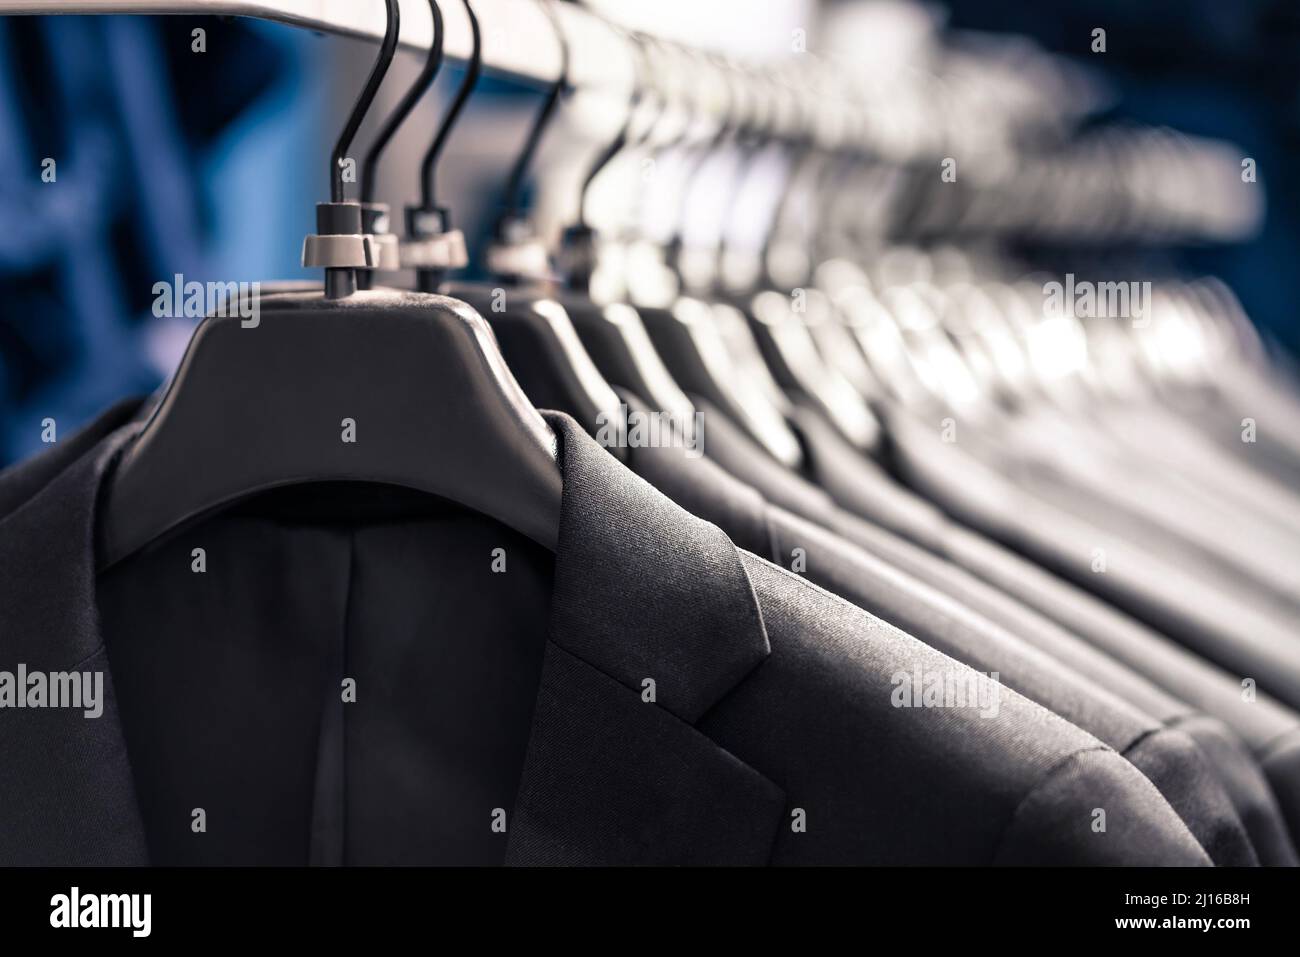 Suits in fashion store for men or in hanger in wardrobe. Jacket rack in apparel retail shop. New elegant luxury collection. Stock Photo